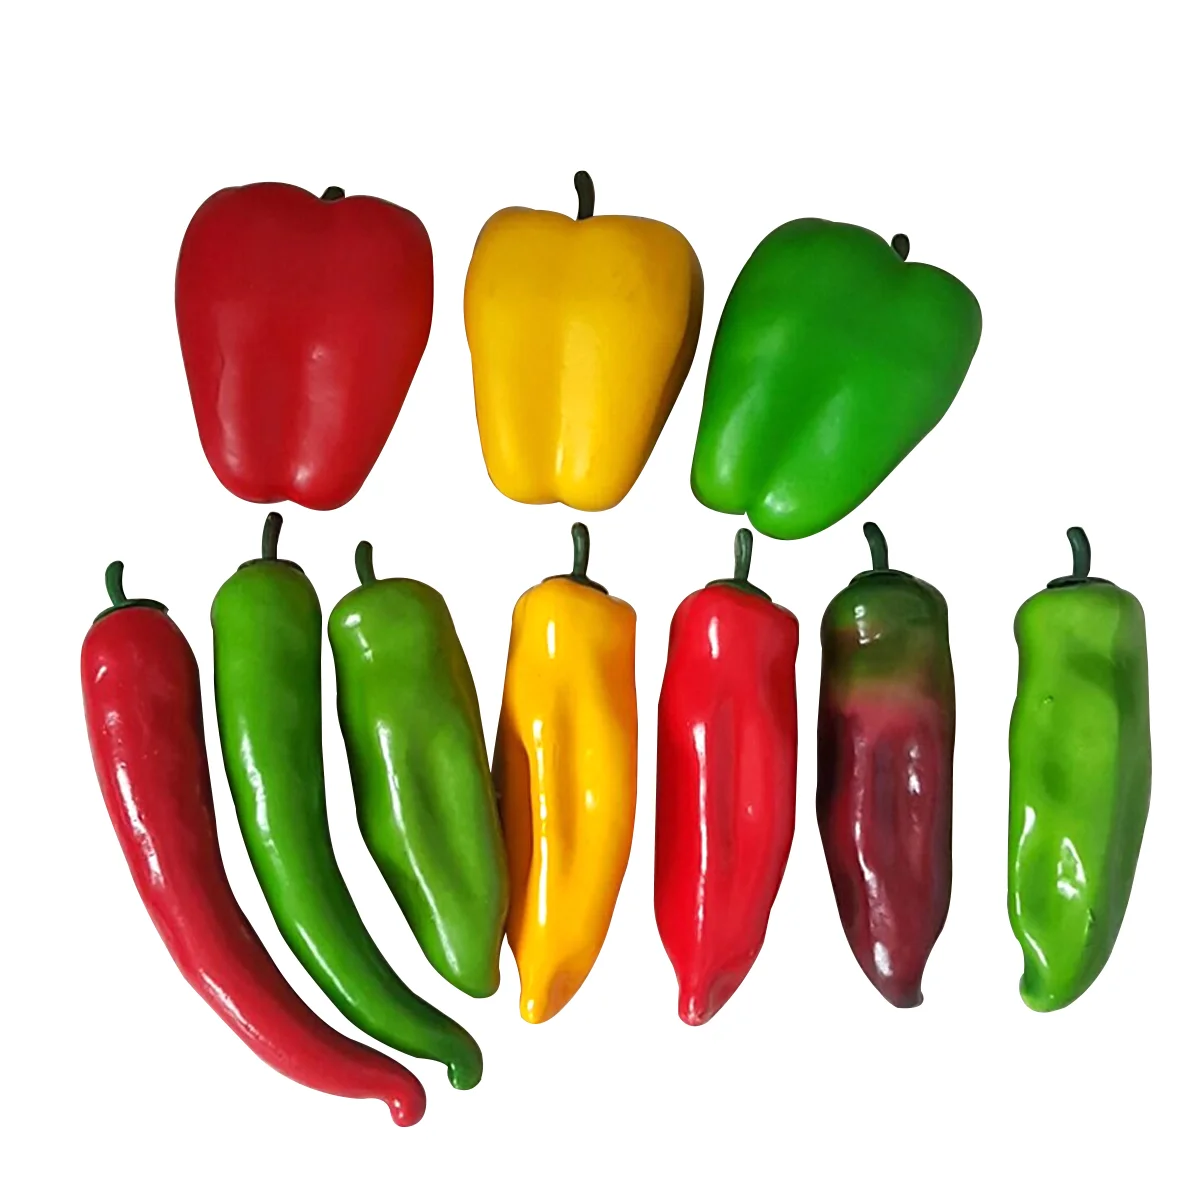 

Peppers Artificial Fake Chili Lifelike Bell Veggie Pepper Kitchenmodel Photography Vegetables Mixed Miniaturedecorative Prop